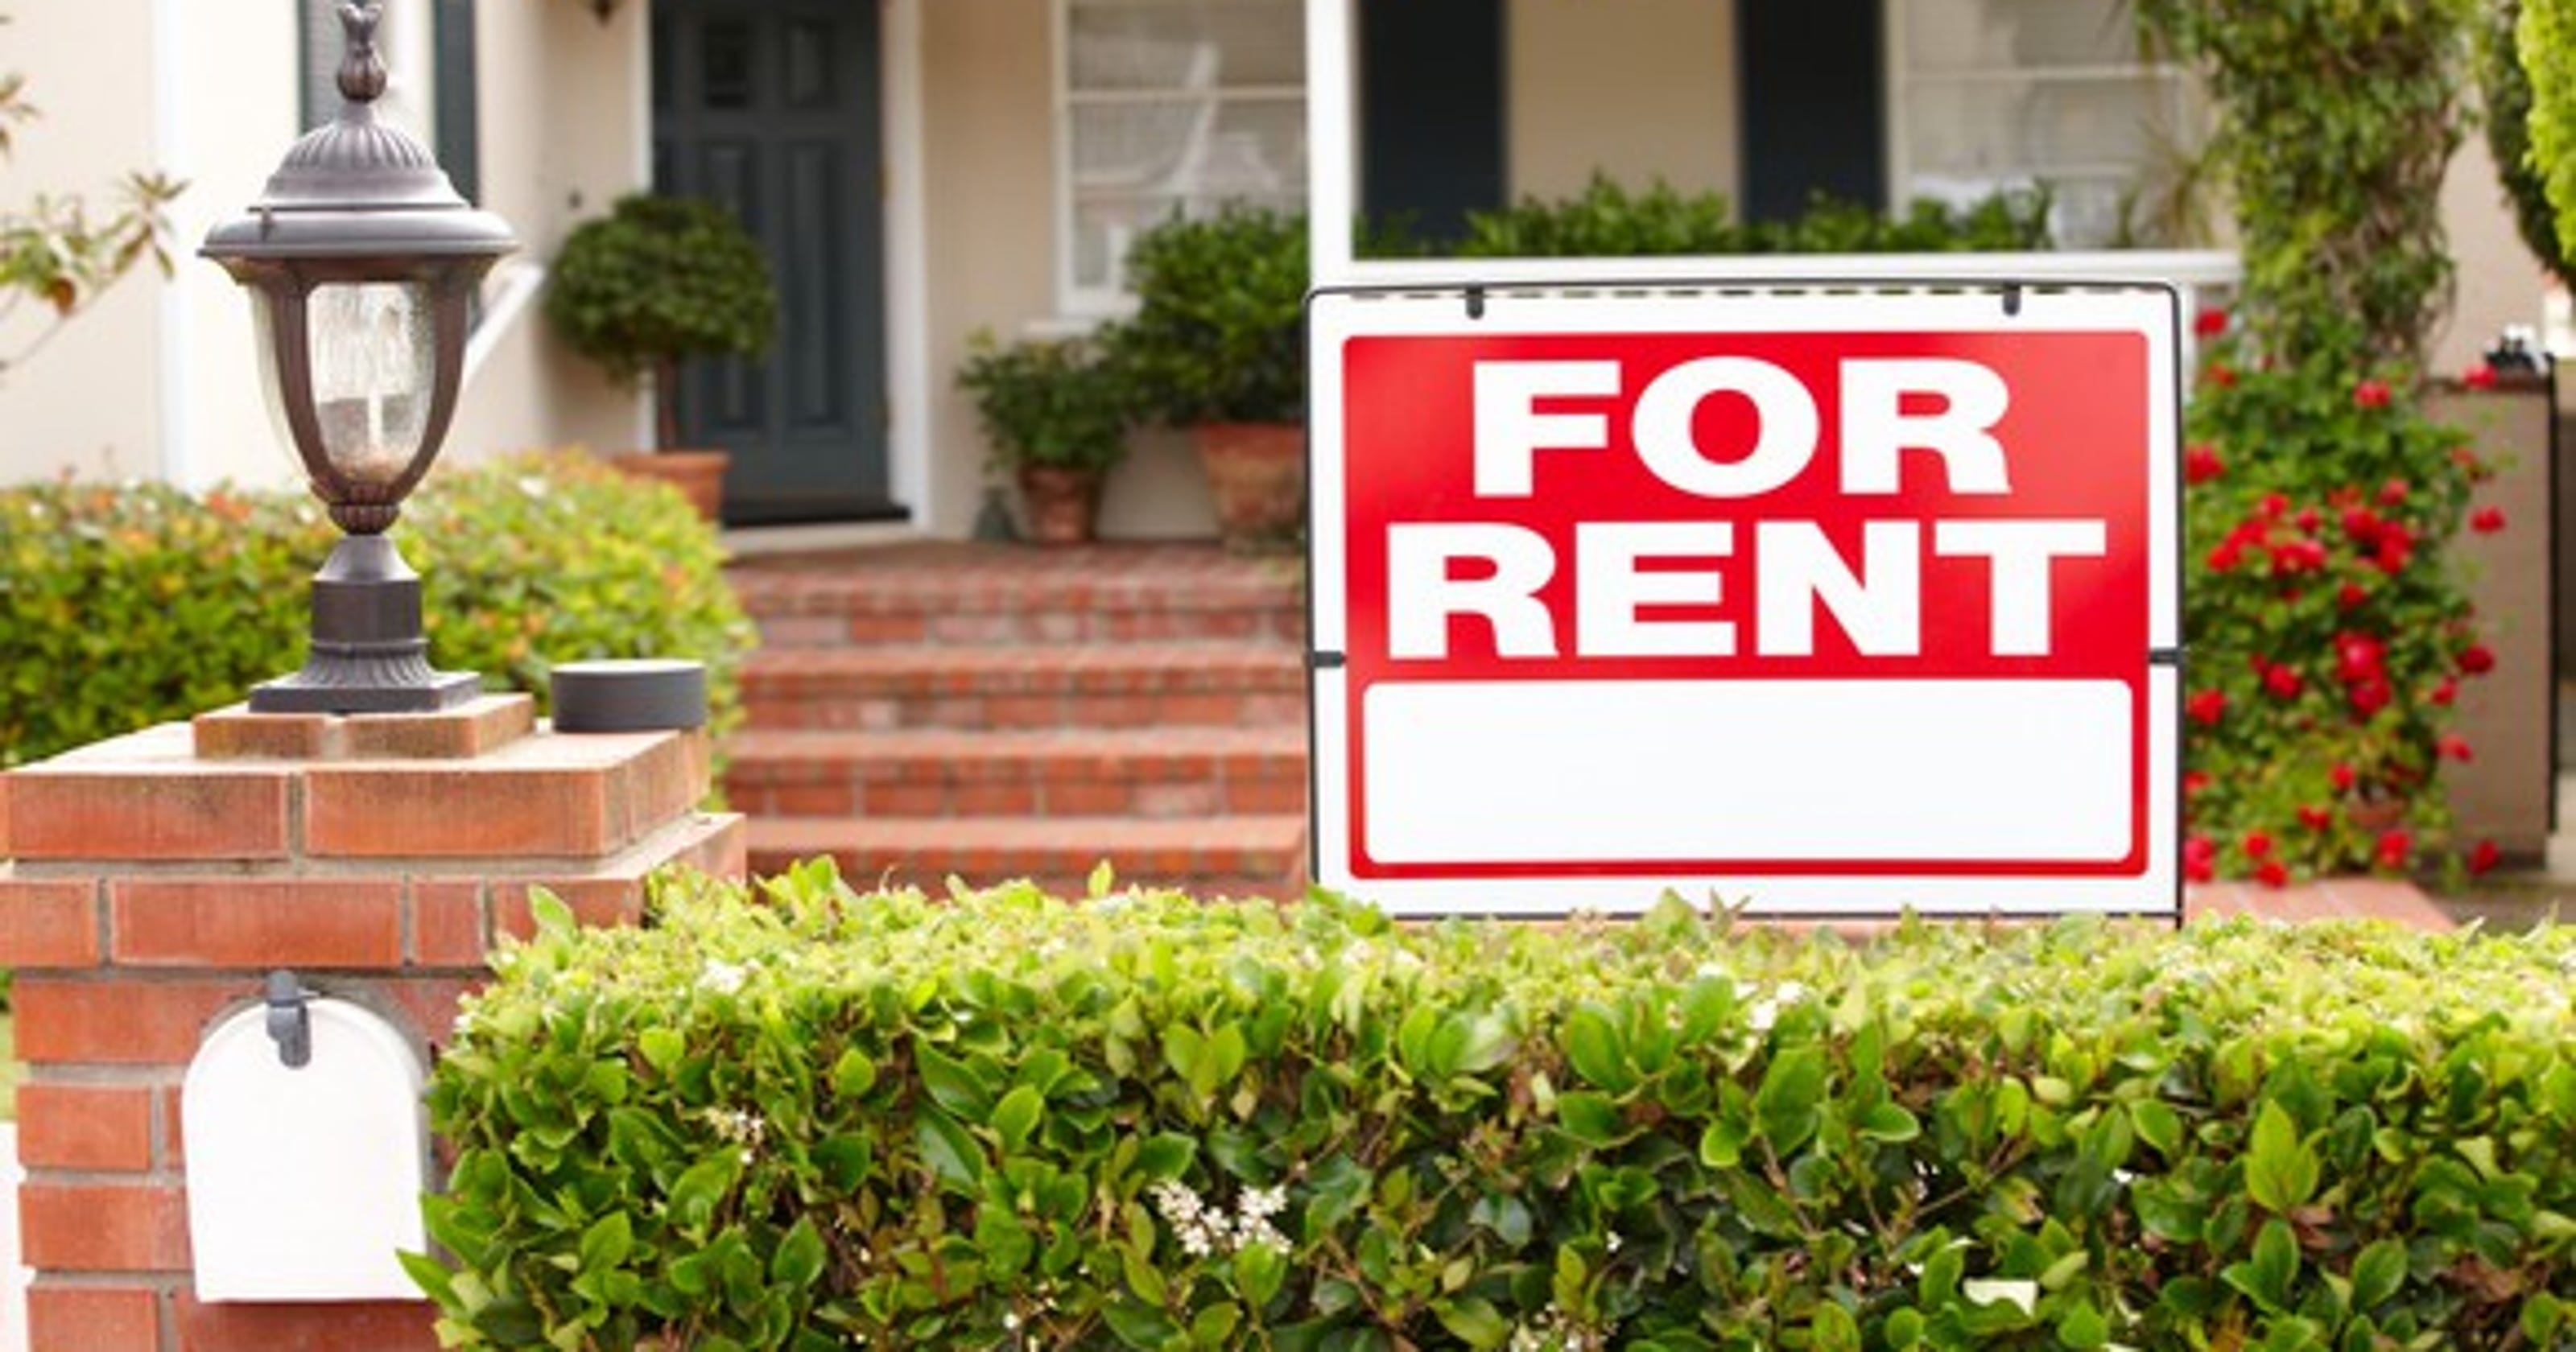 Renting homes is overtaking the housing market. Here's why